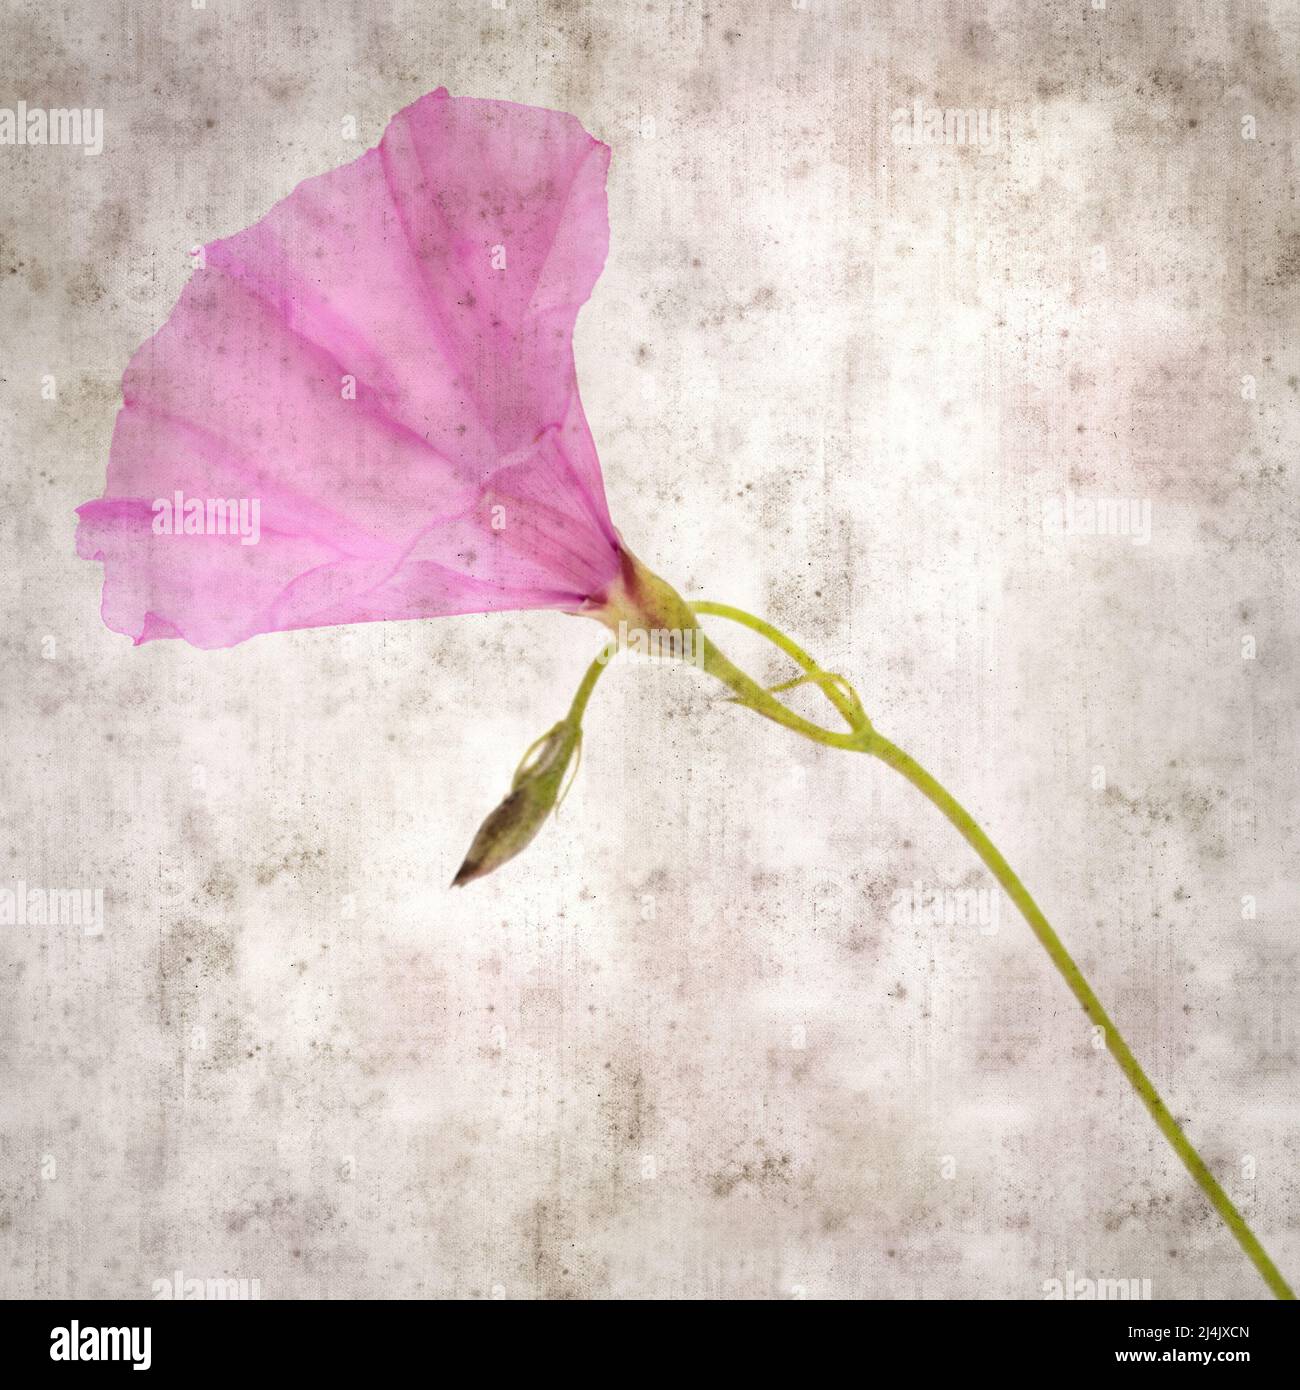 square stylish old textured paper background with pale pink flowers of Convolvulus althaeoides, mallow bindweed Stock Photo